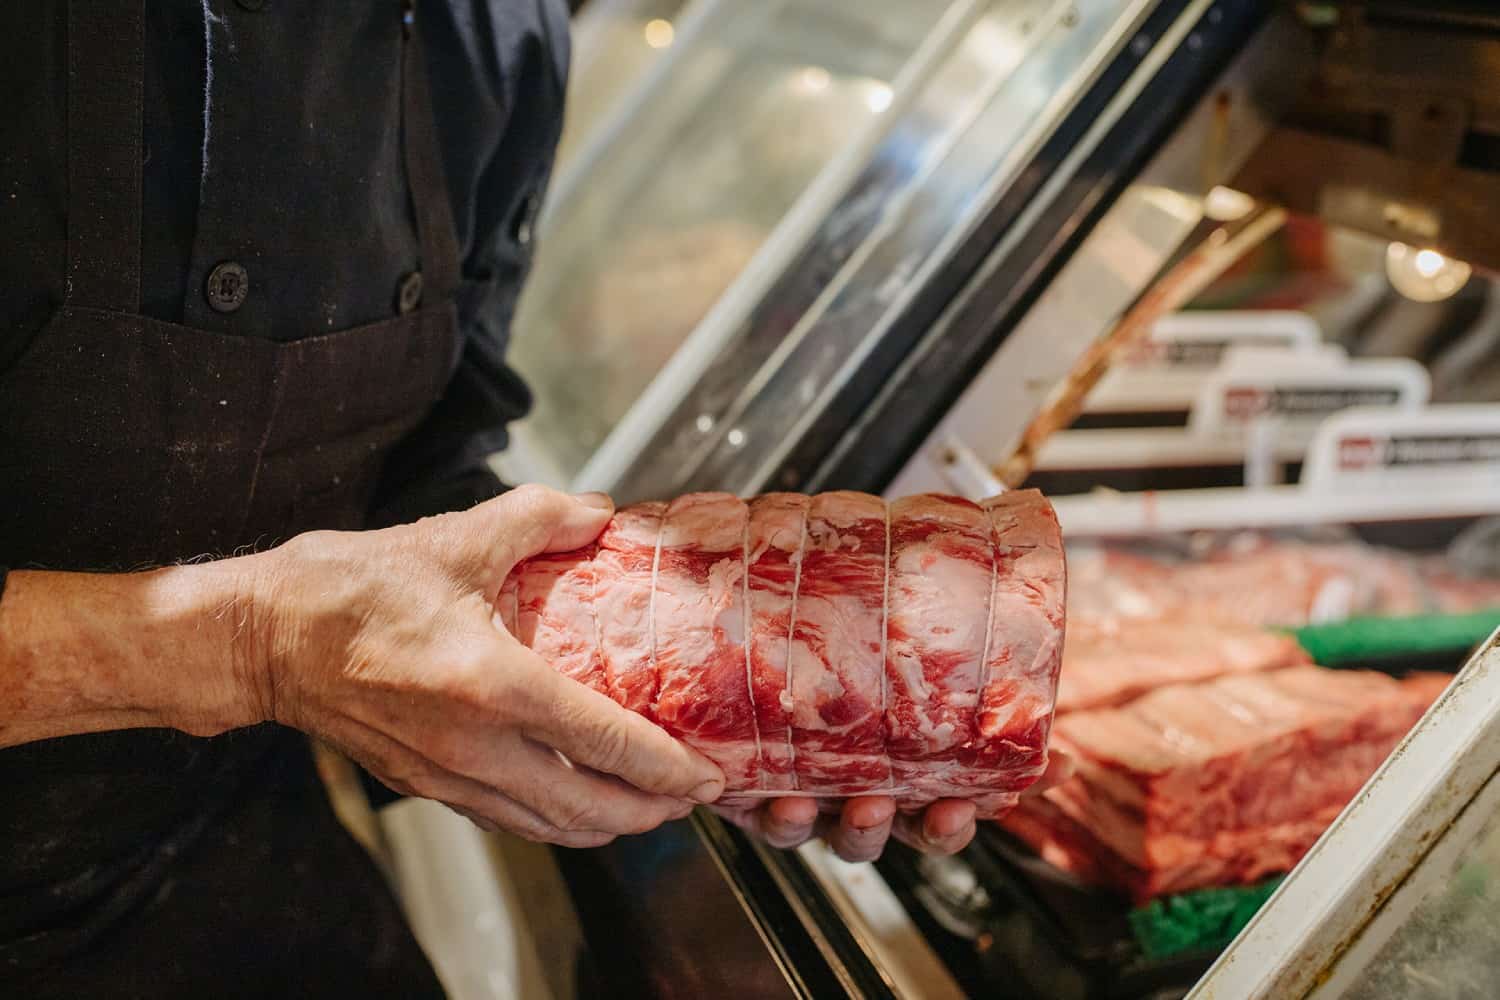 Meat being put in fridge